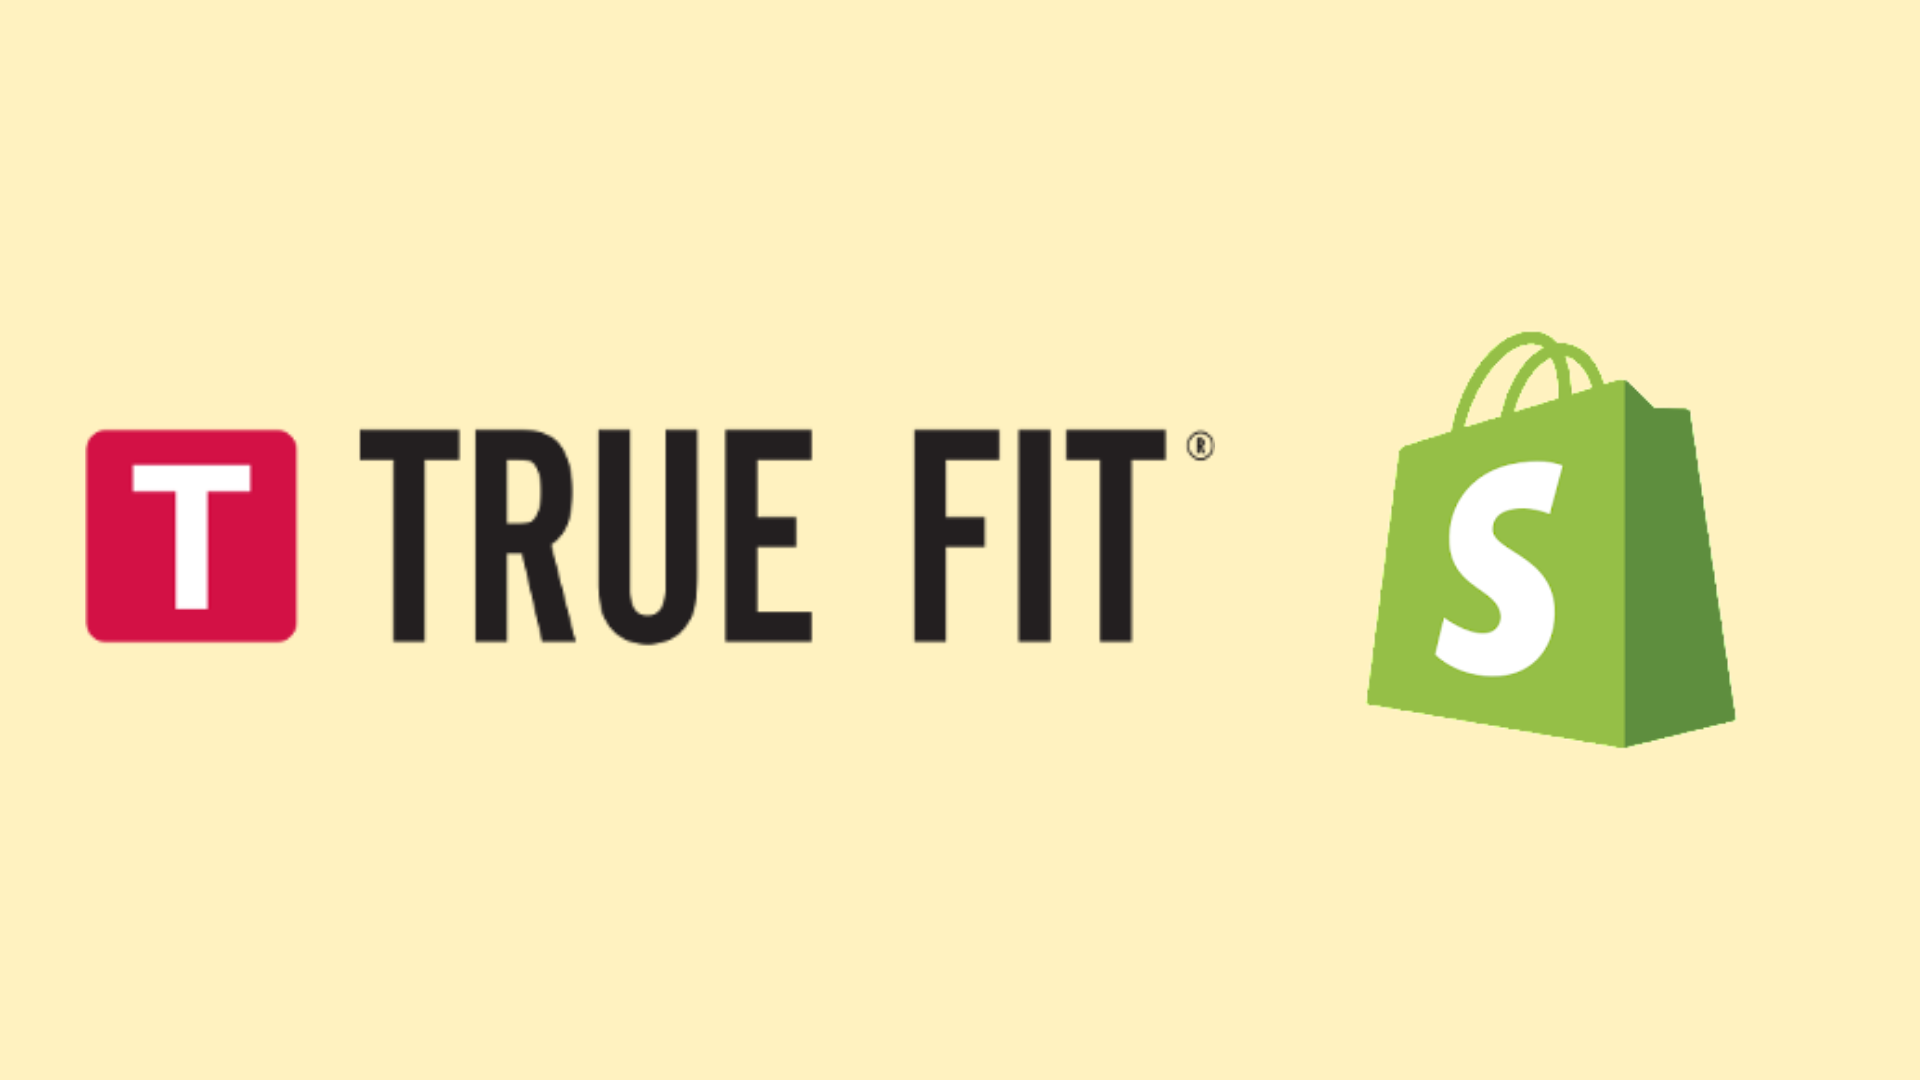 true fit and shopify logos, implying their latest collaboration for AI integration